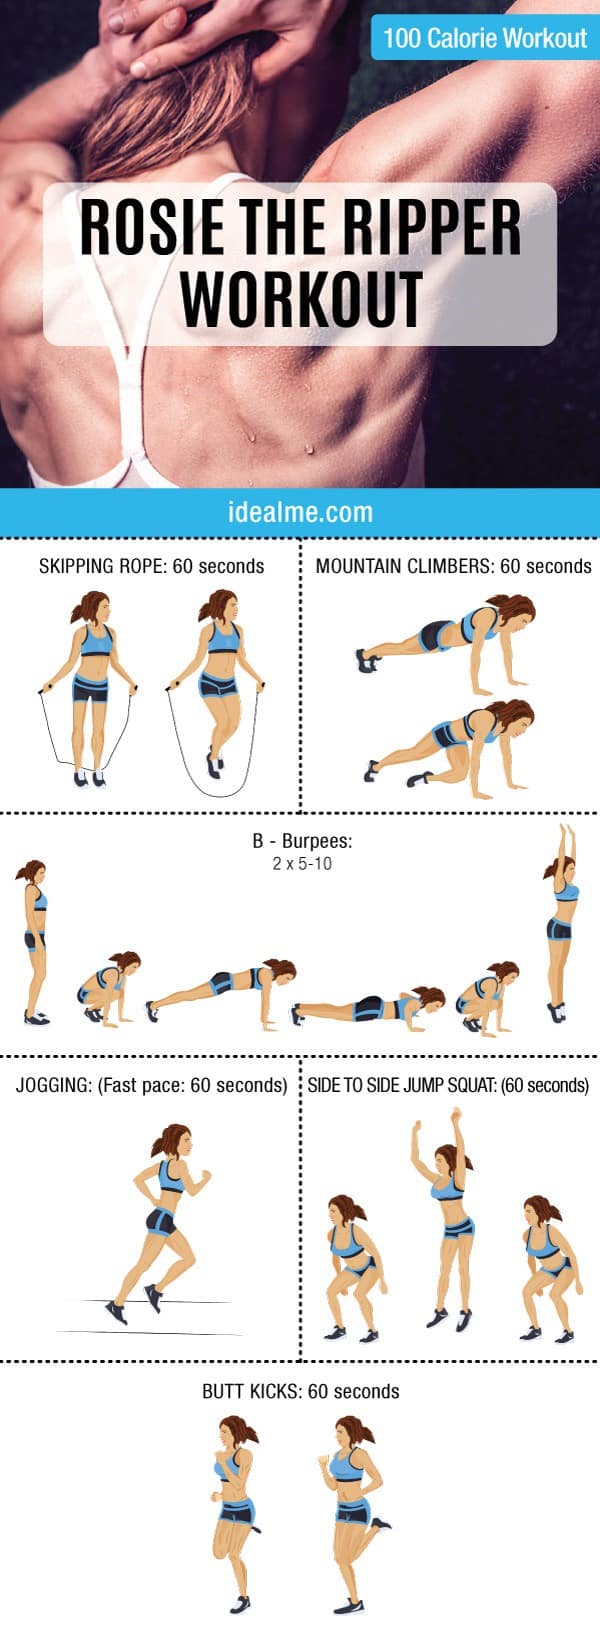 Check out this awesome 10 minute Rosie the Ripper giant set 100-calorie workout. Giant sets are great for people looking to burn extra body fat in a short amount of time.